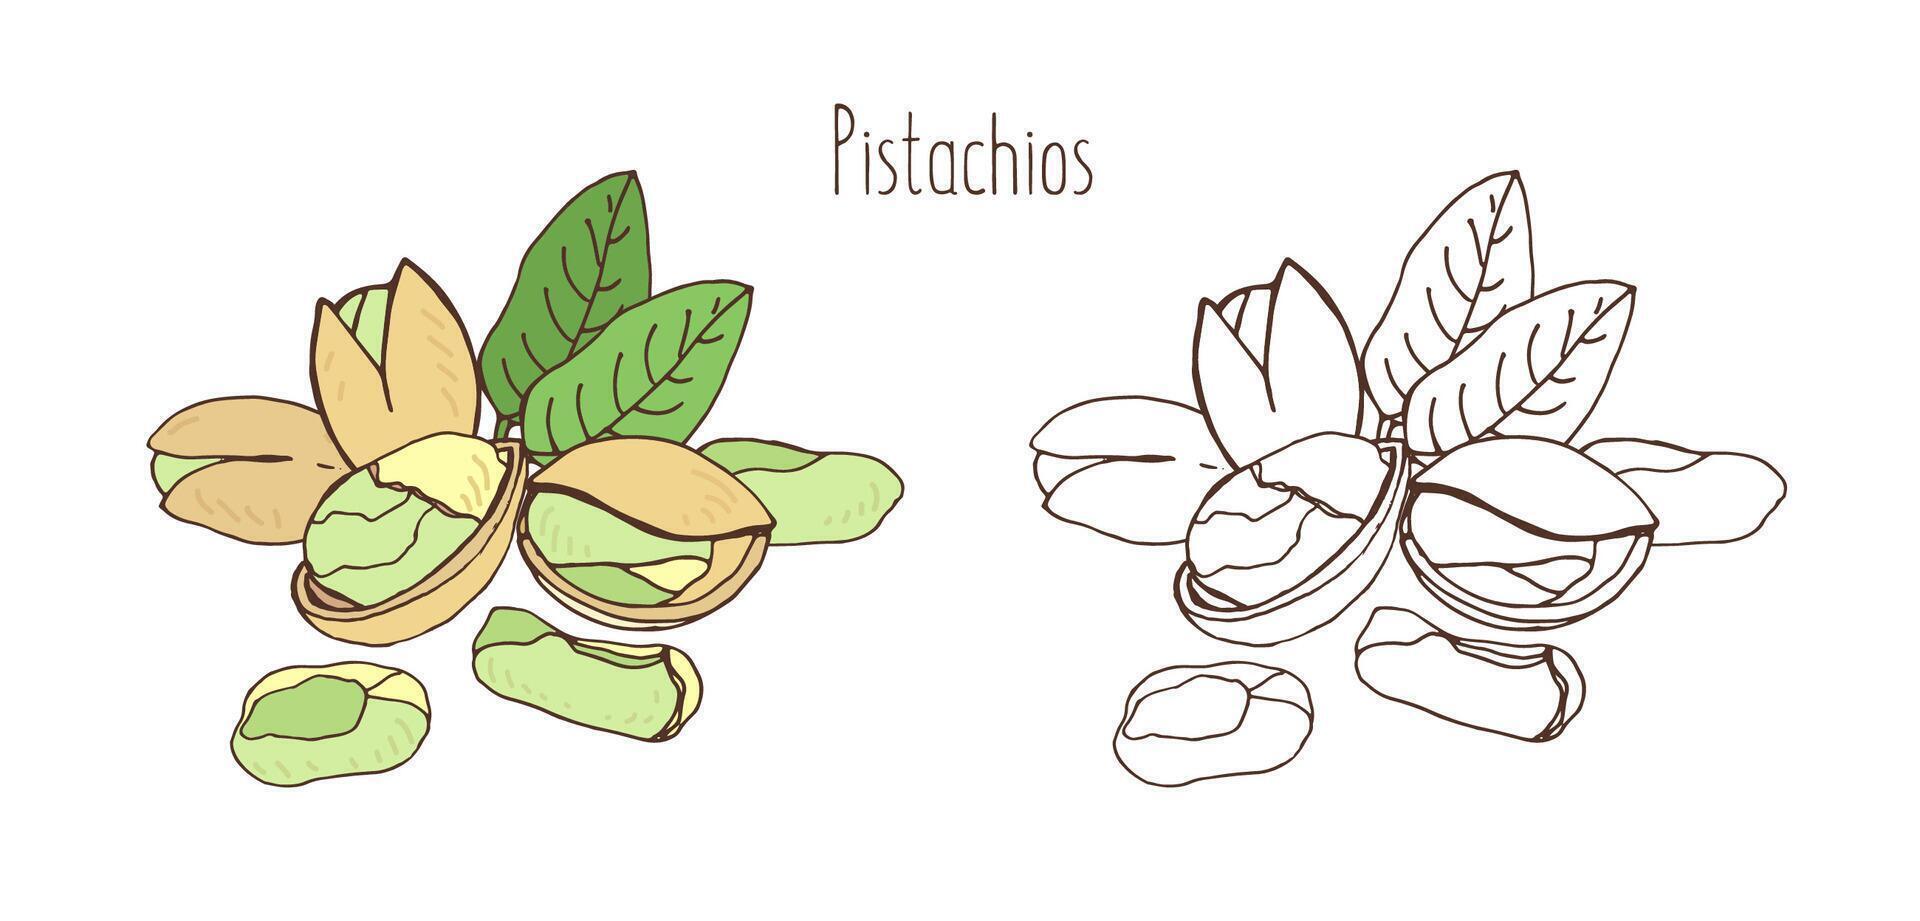 Colored and monochrome drawings of pistachios in shell and shelled with pair of leaves. Delicious edible drupe or nut hand drawn in elegant vintage style. Natural vector illustration.